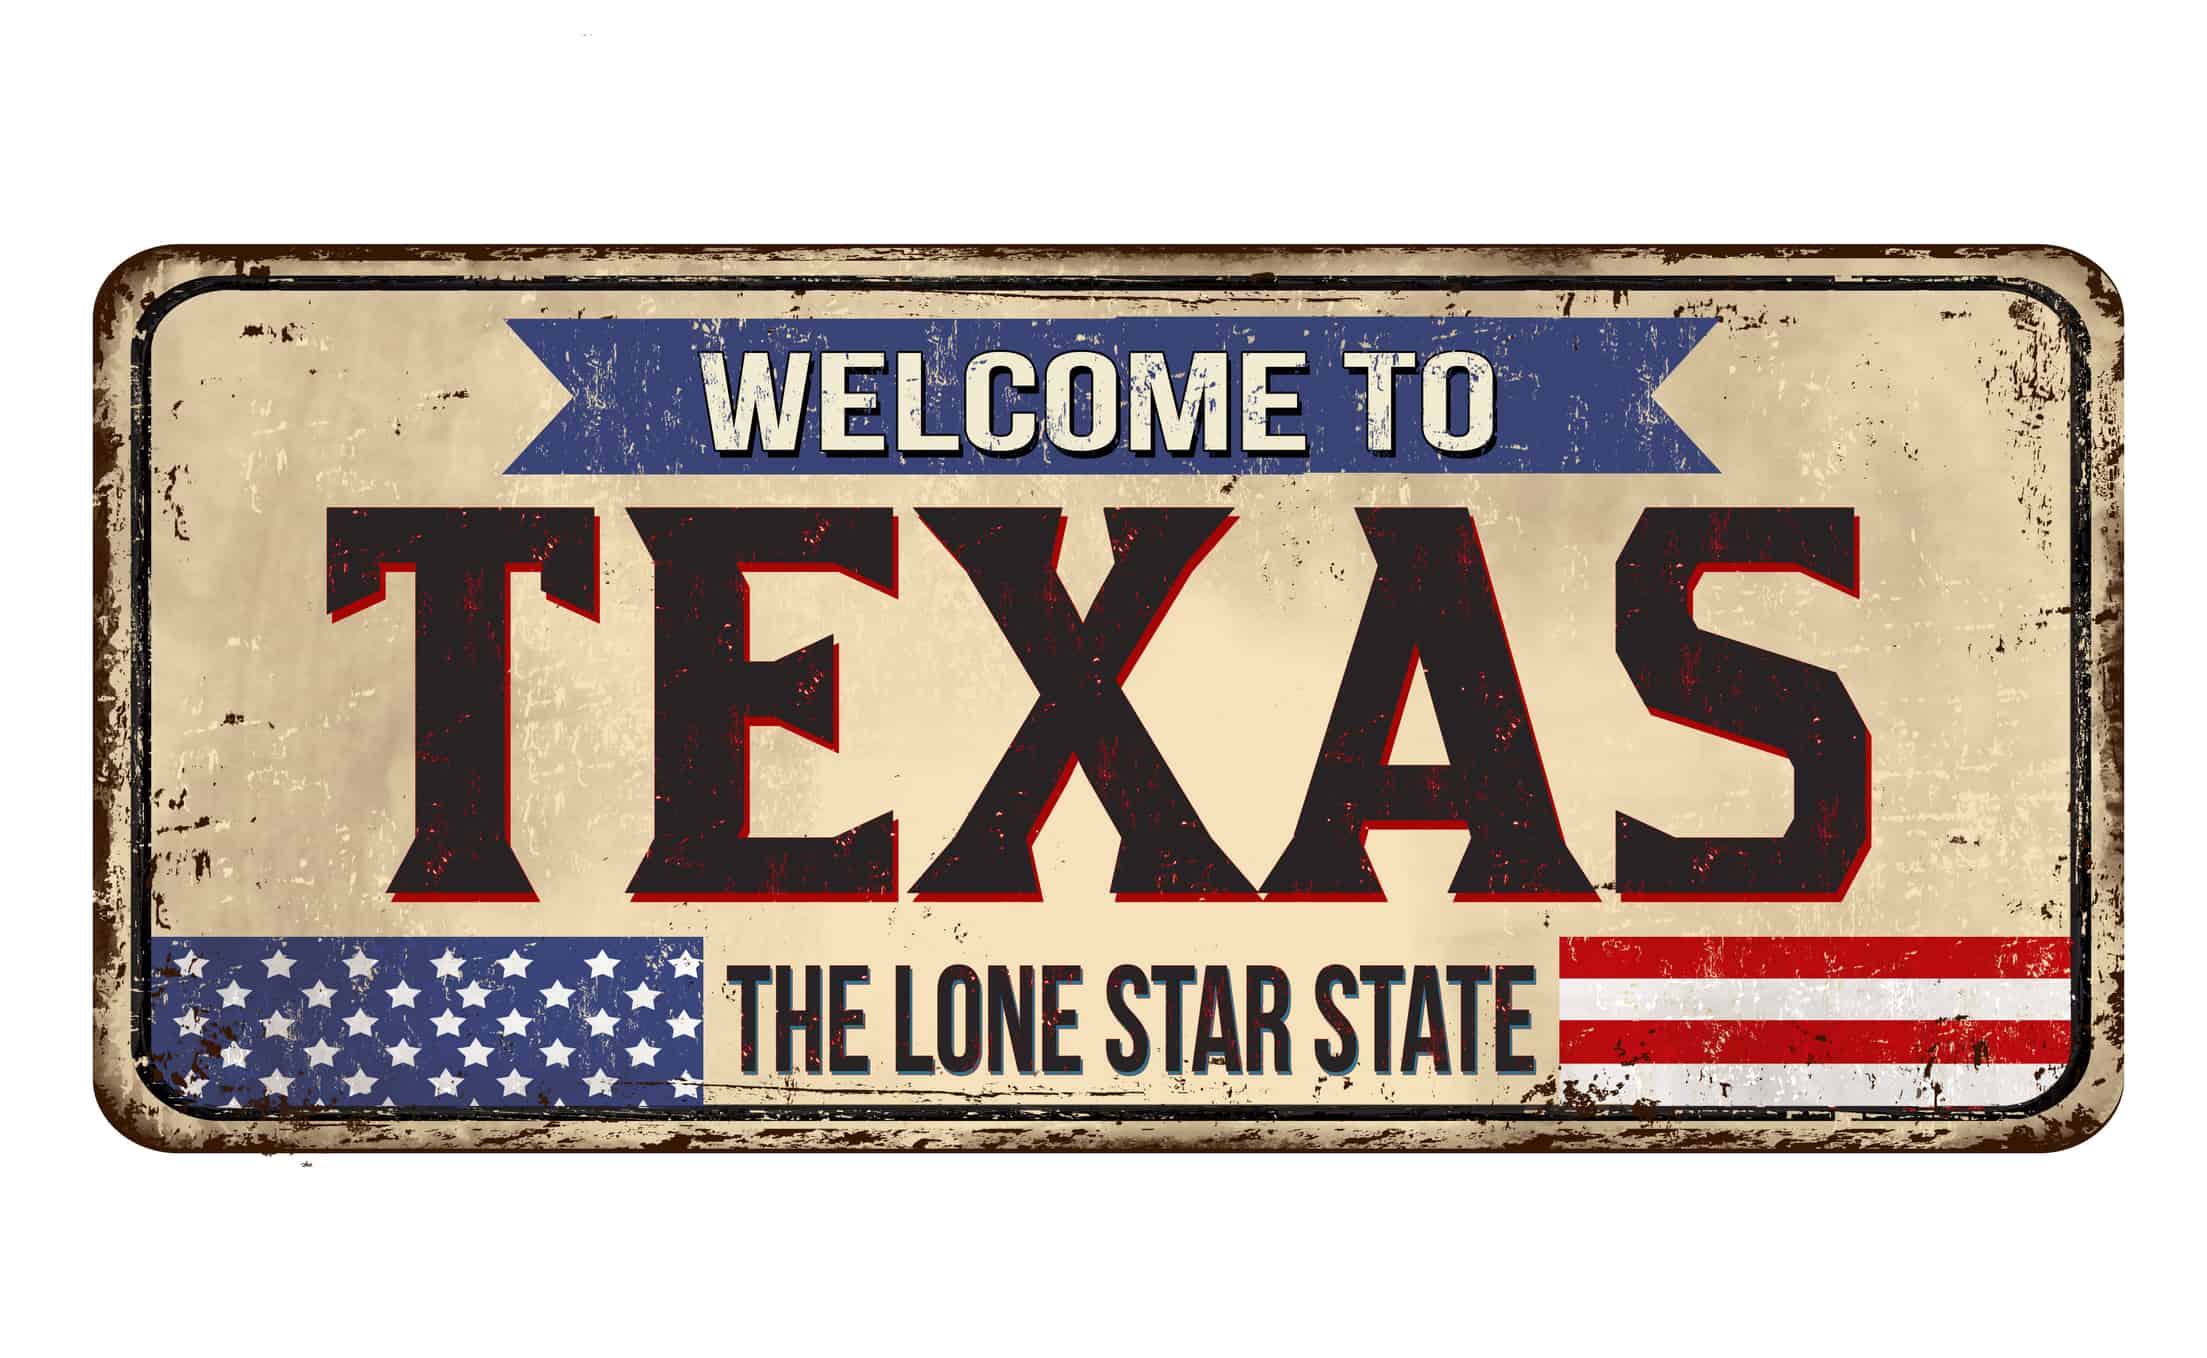 Welcome to Texas vintage rusty metal sign